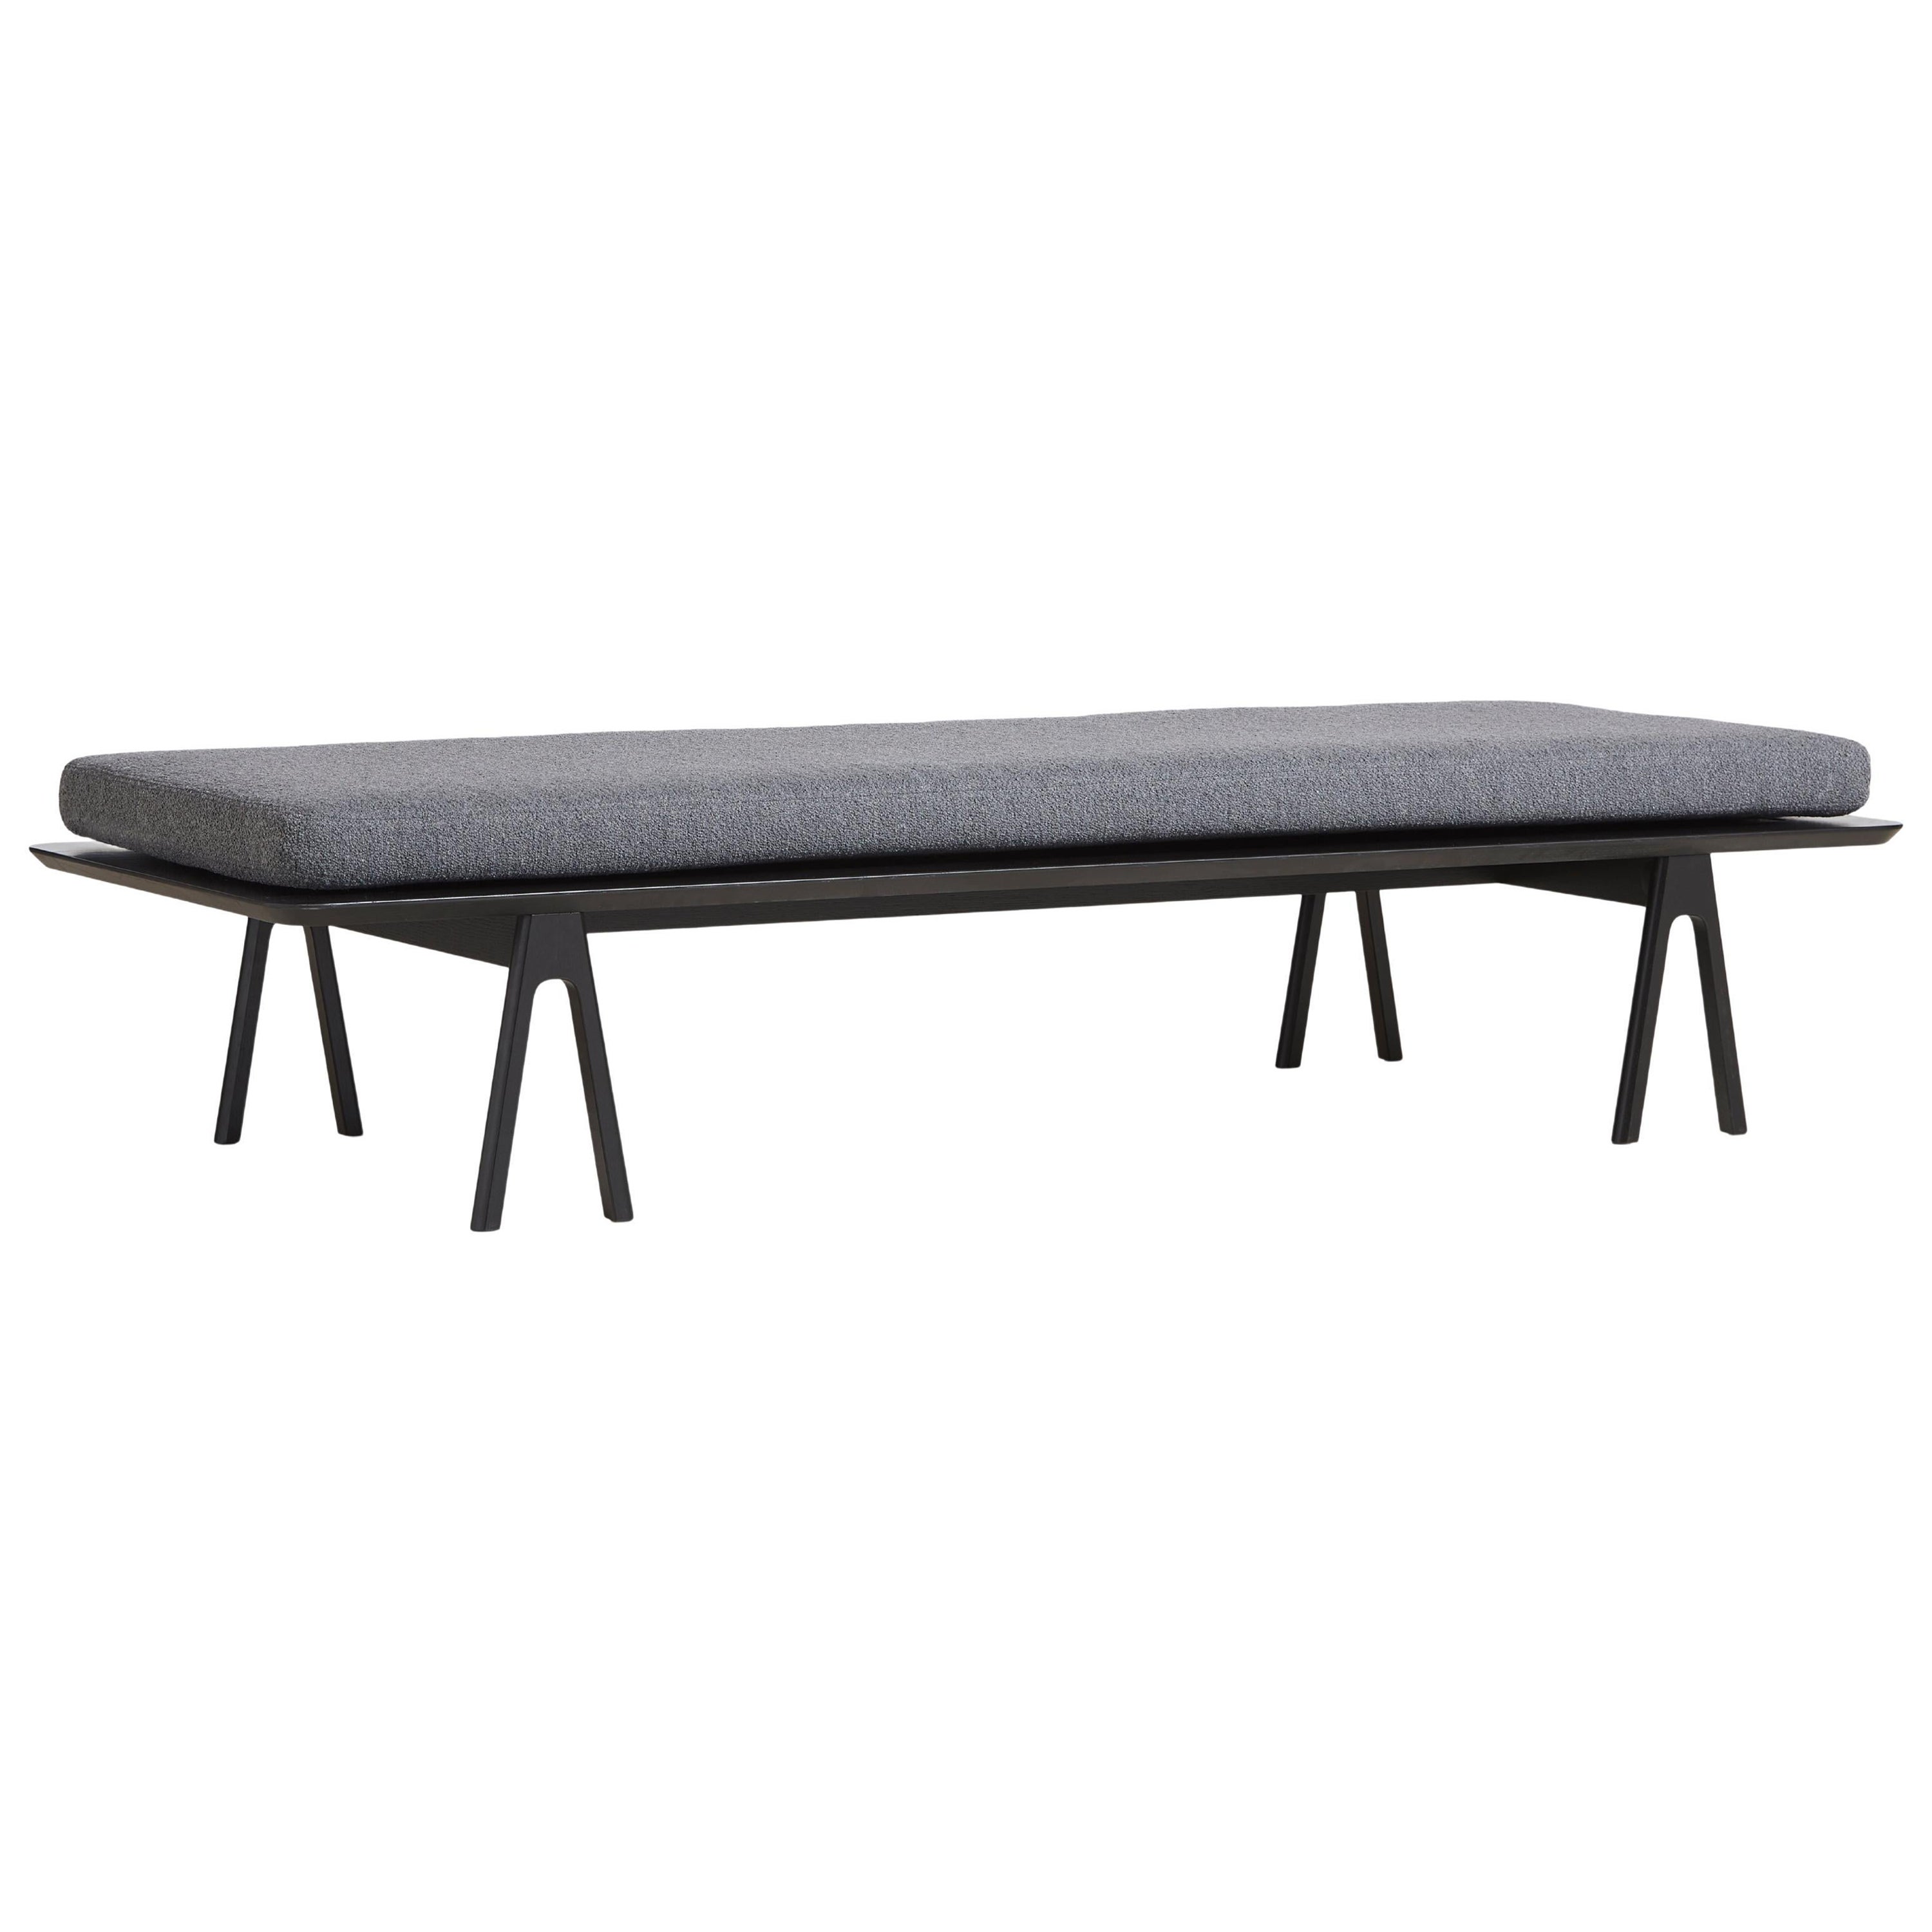 Grey Black Boucle Level Daybed by Msds Studio